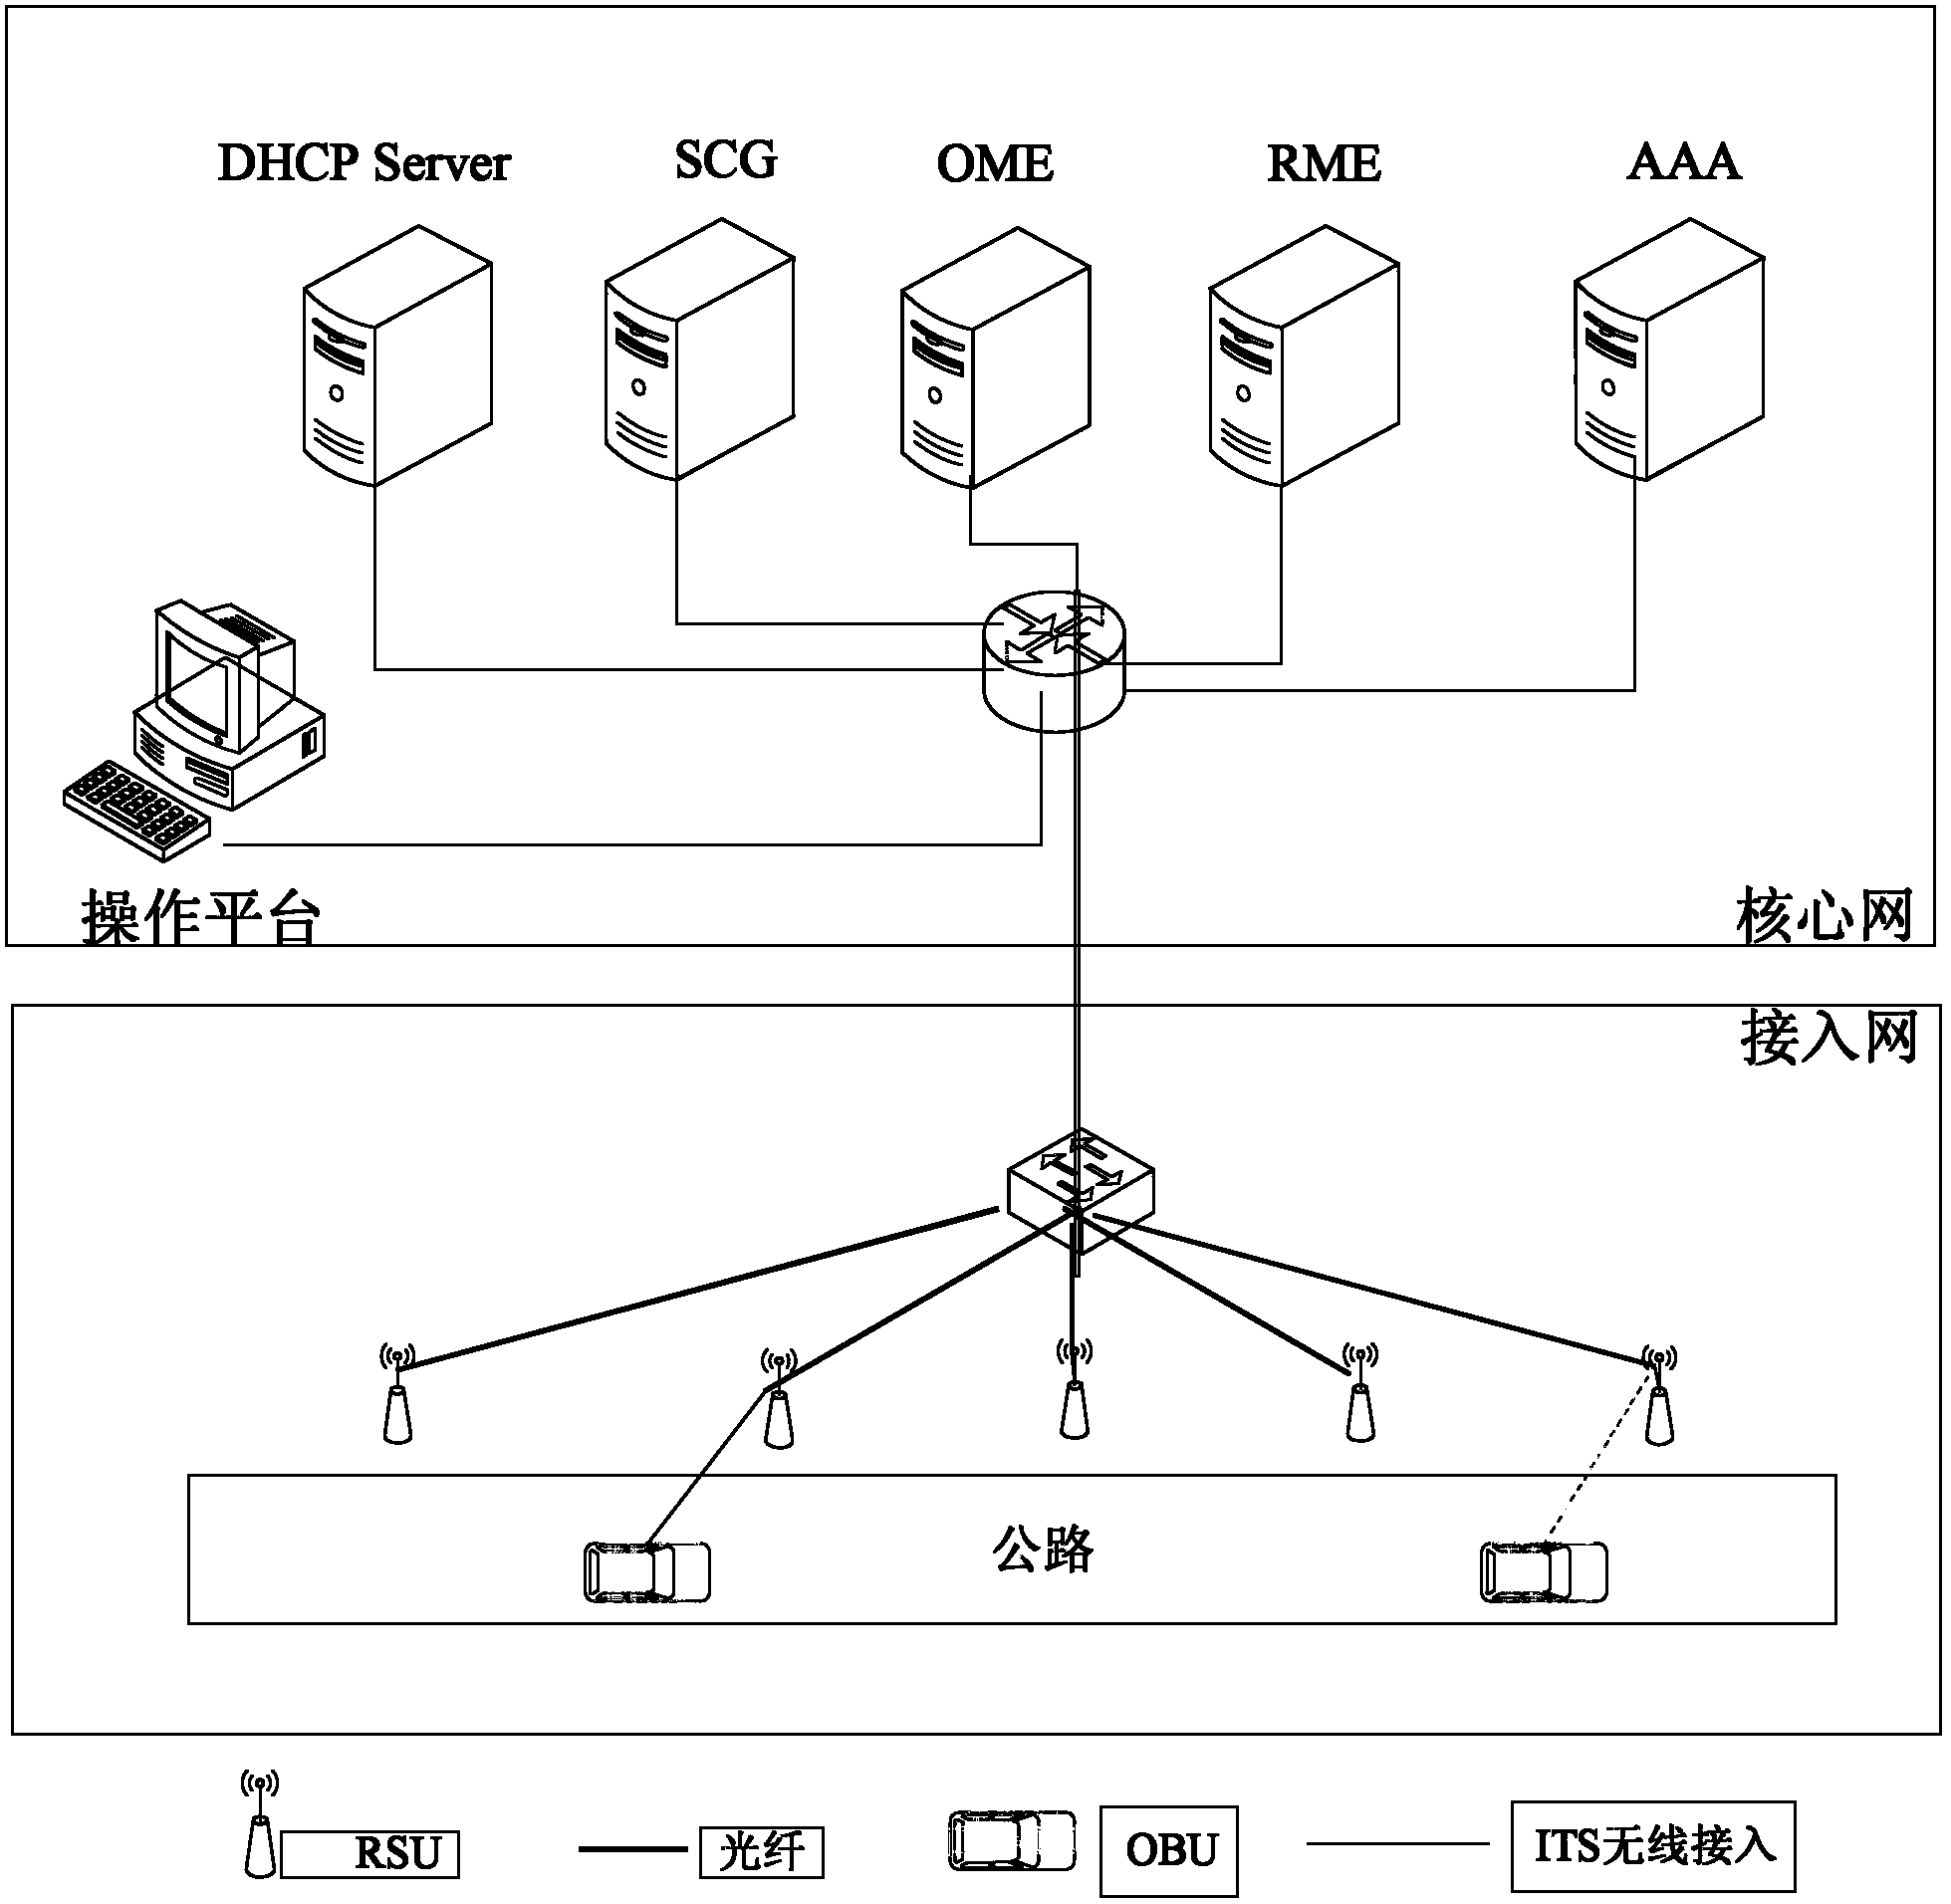 Method and equipment for spreading traffic information